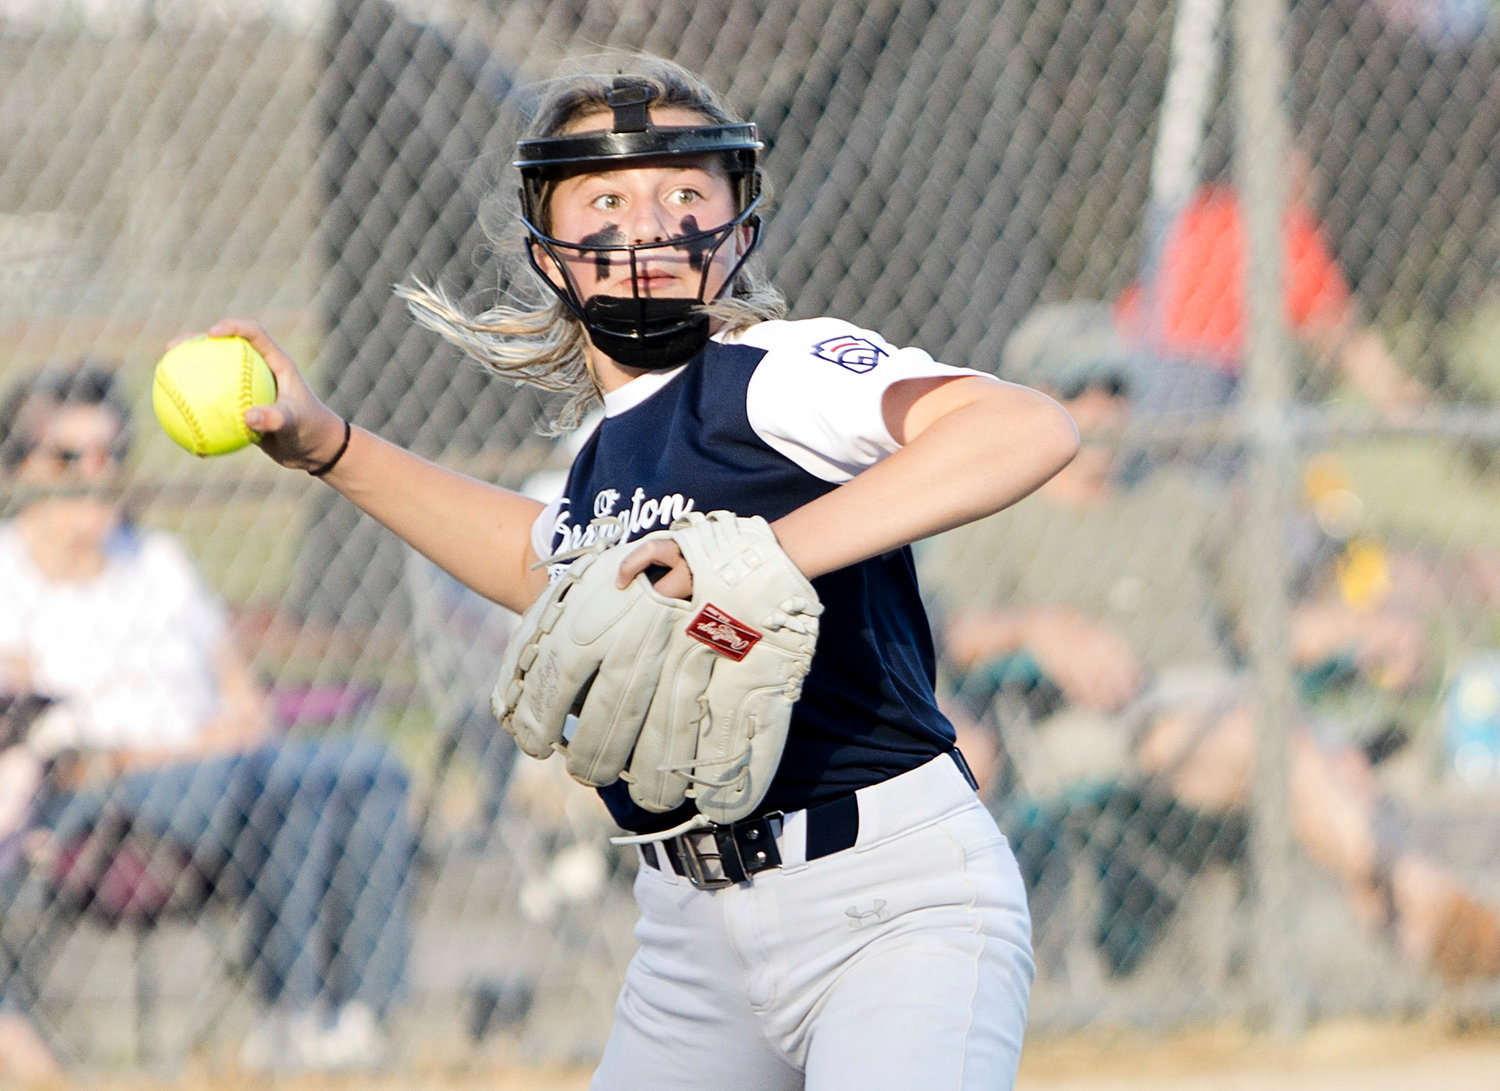 Barrington's Audry Paxton throws to first while competing against Tiverton in the 12U All-Star playoffs, Wednesday.